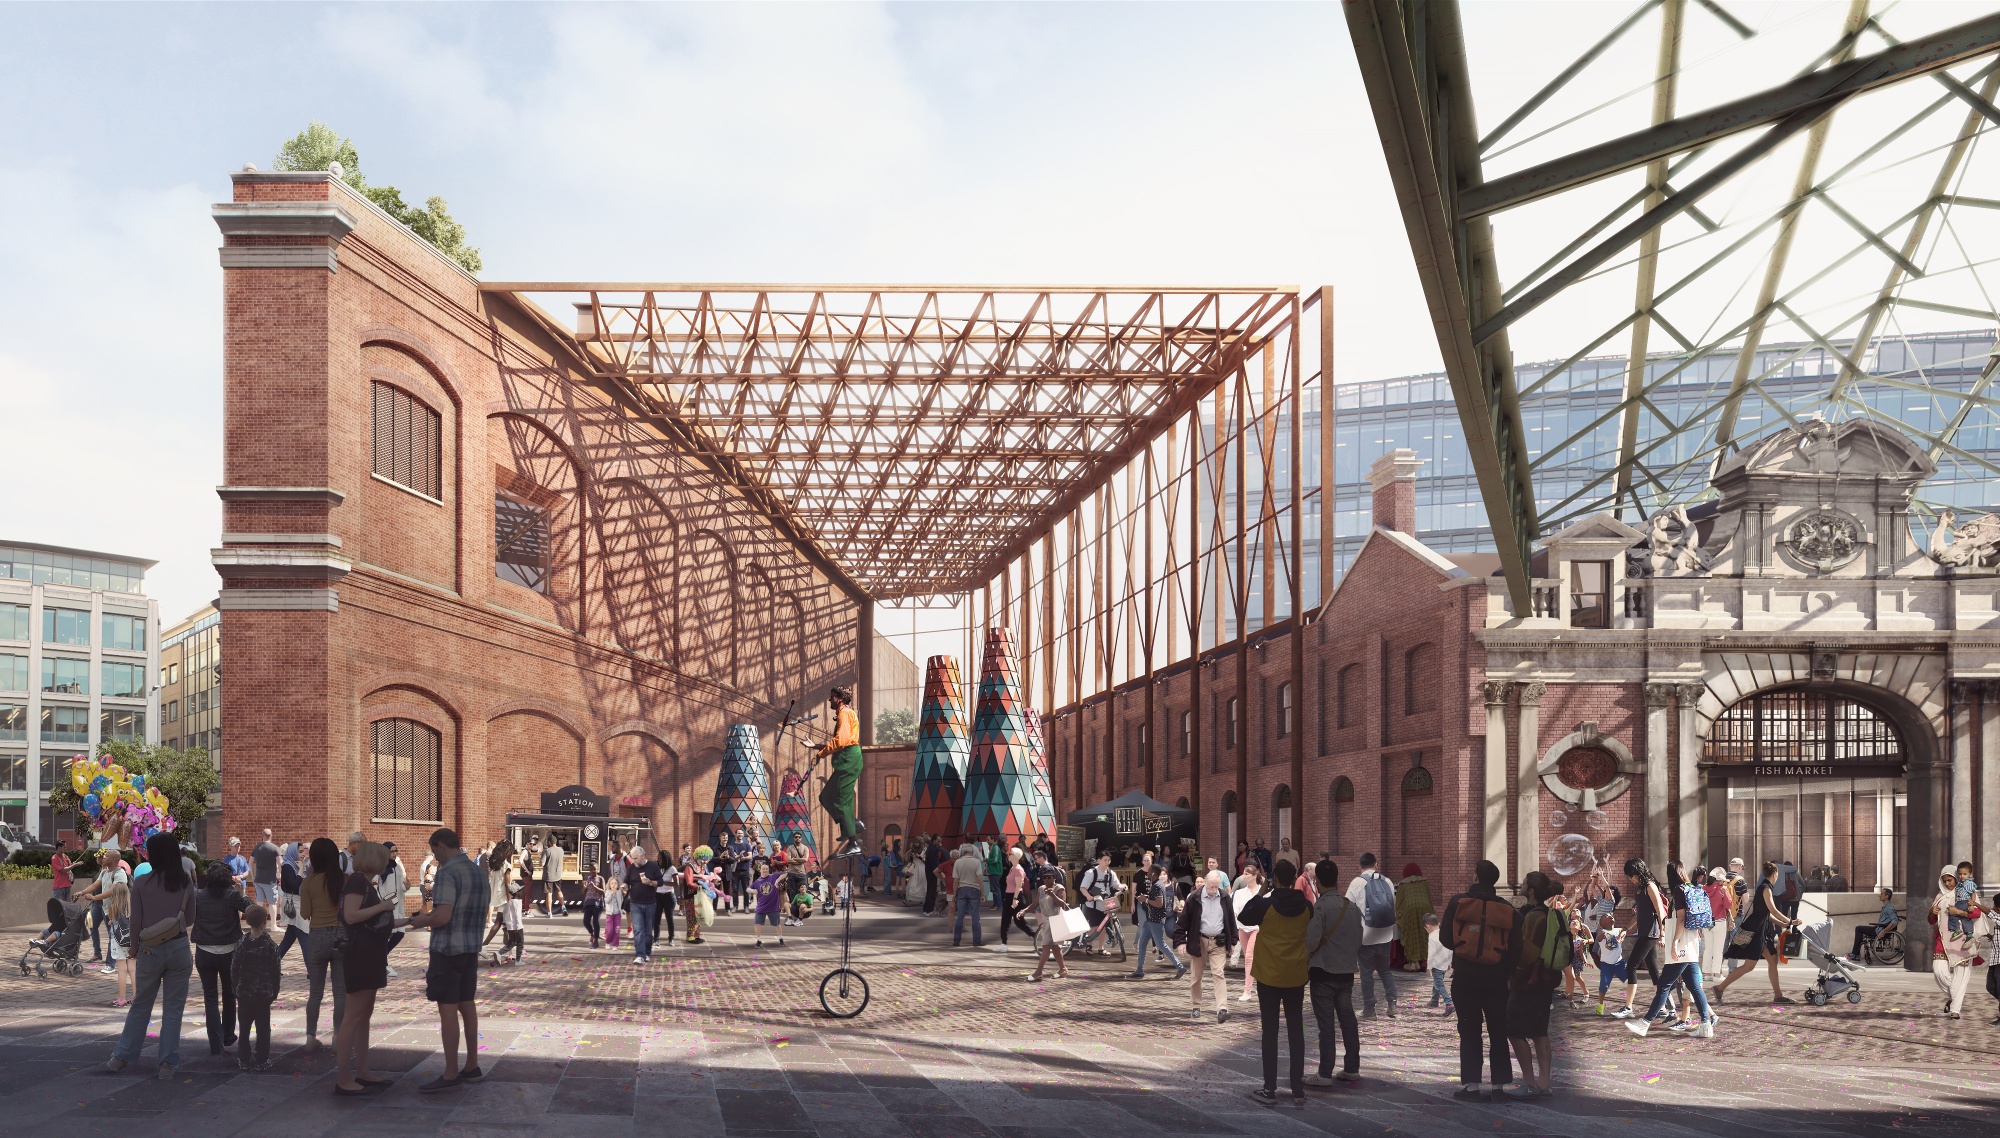 A rendering of Smithfield Market’s redesigned exterior, which is being repurposed as the new home for the Museum of London.